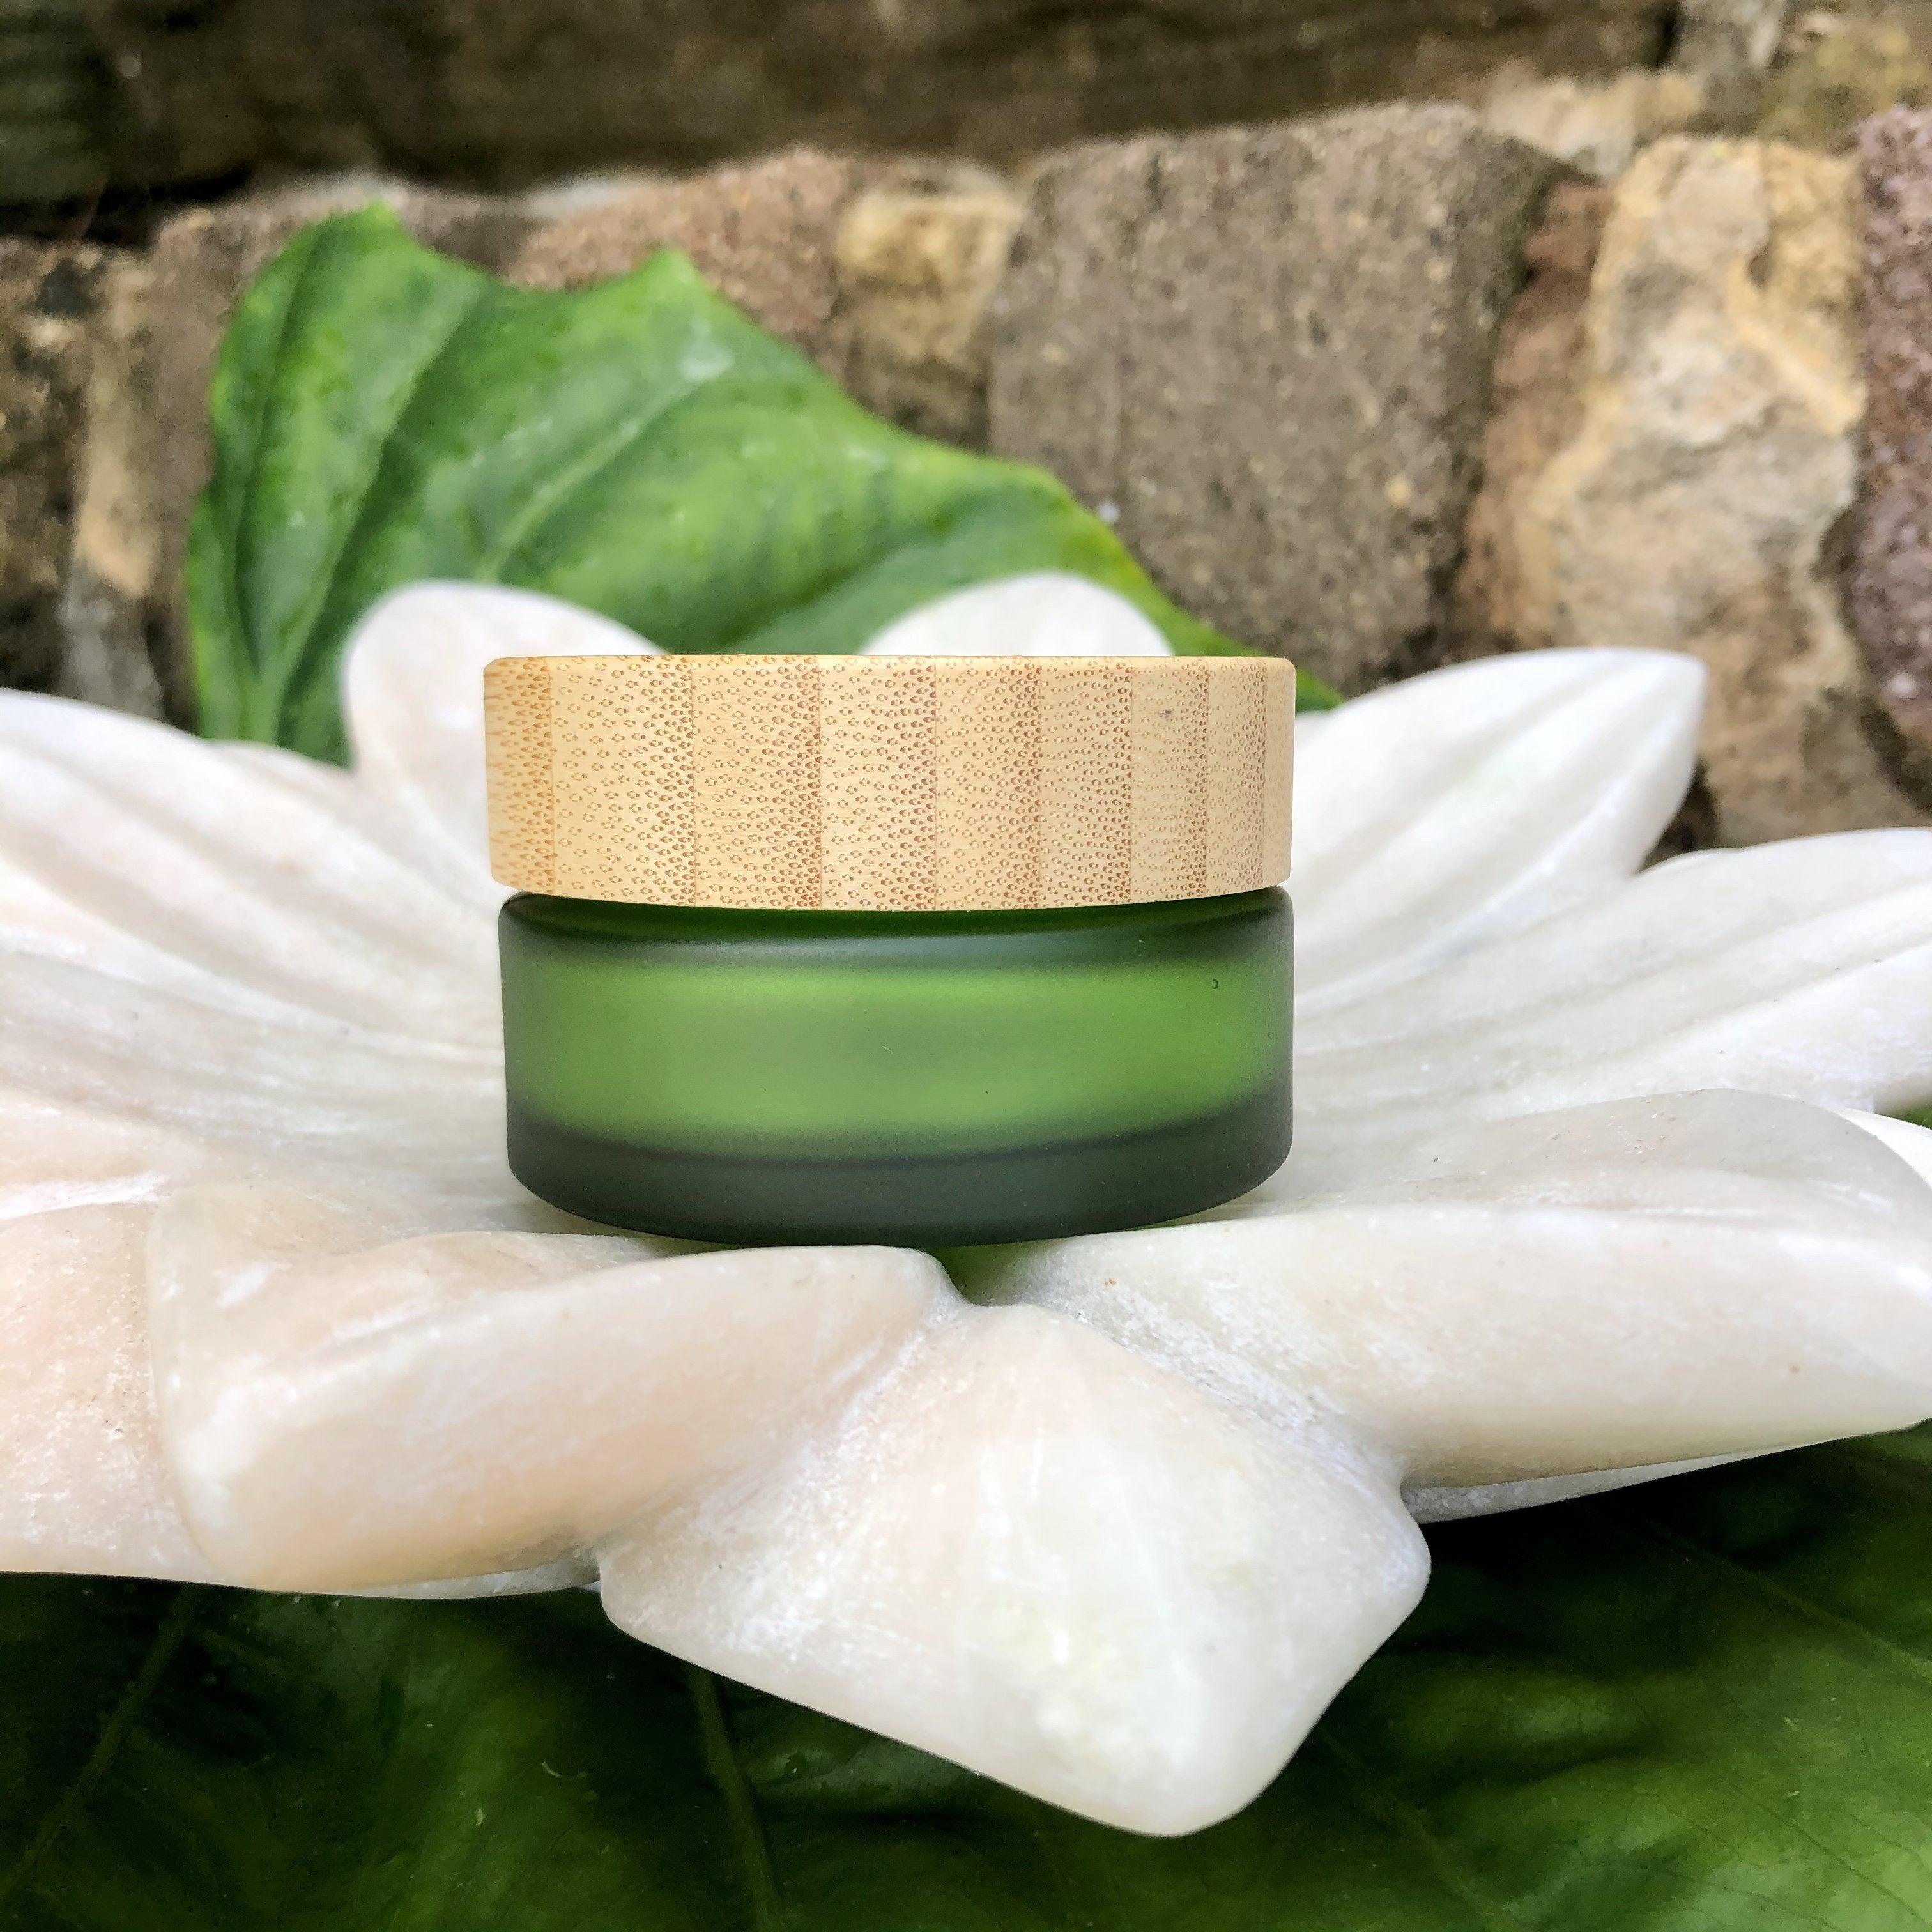 Frosted Green Glass Cosmetic Jar & Dropper - Bamboo Lids - Set of 2Sustainable Bathroom - Us and the Earth